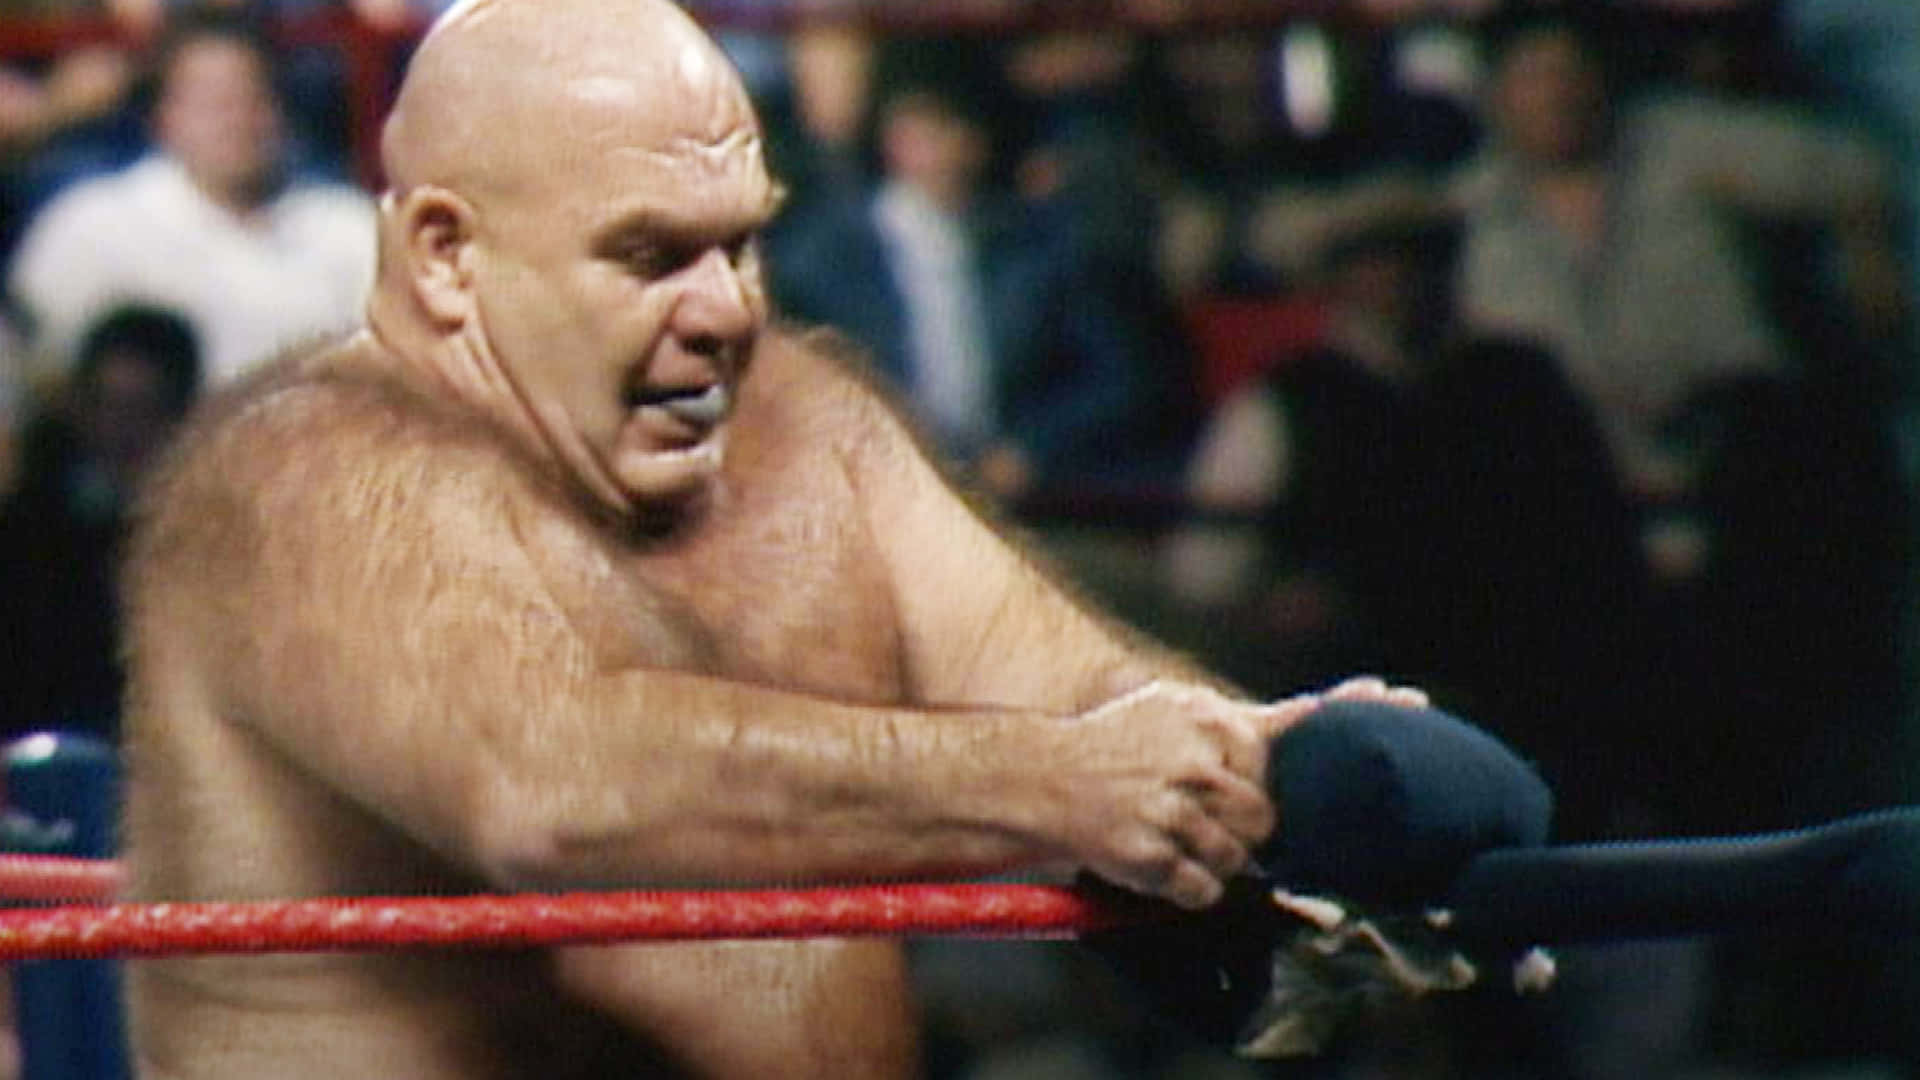 Download George Steele Ripping Turnbuckle Pad Wallpaper 